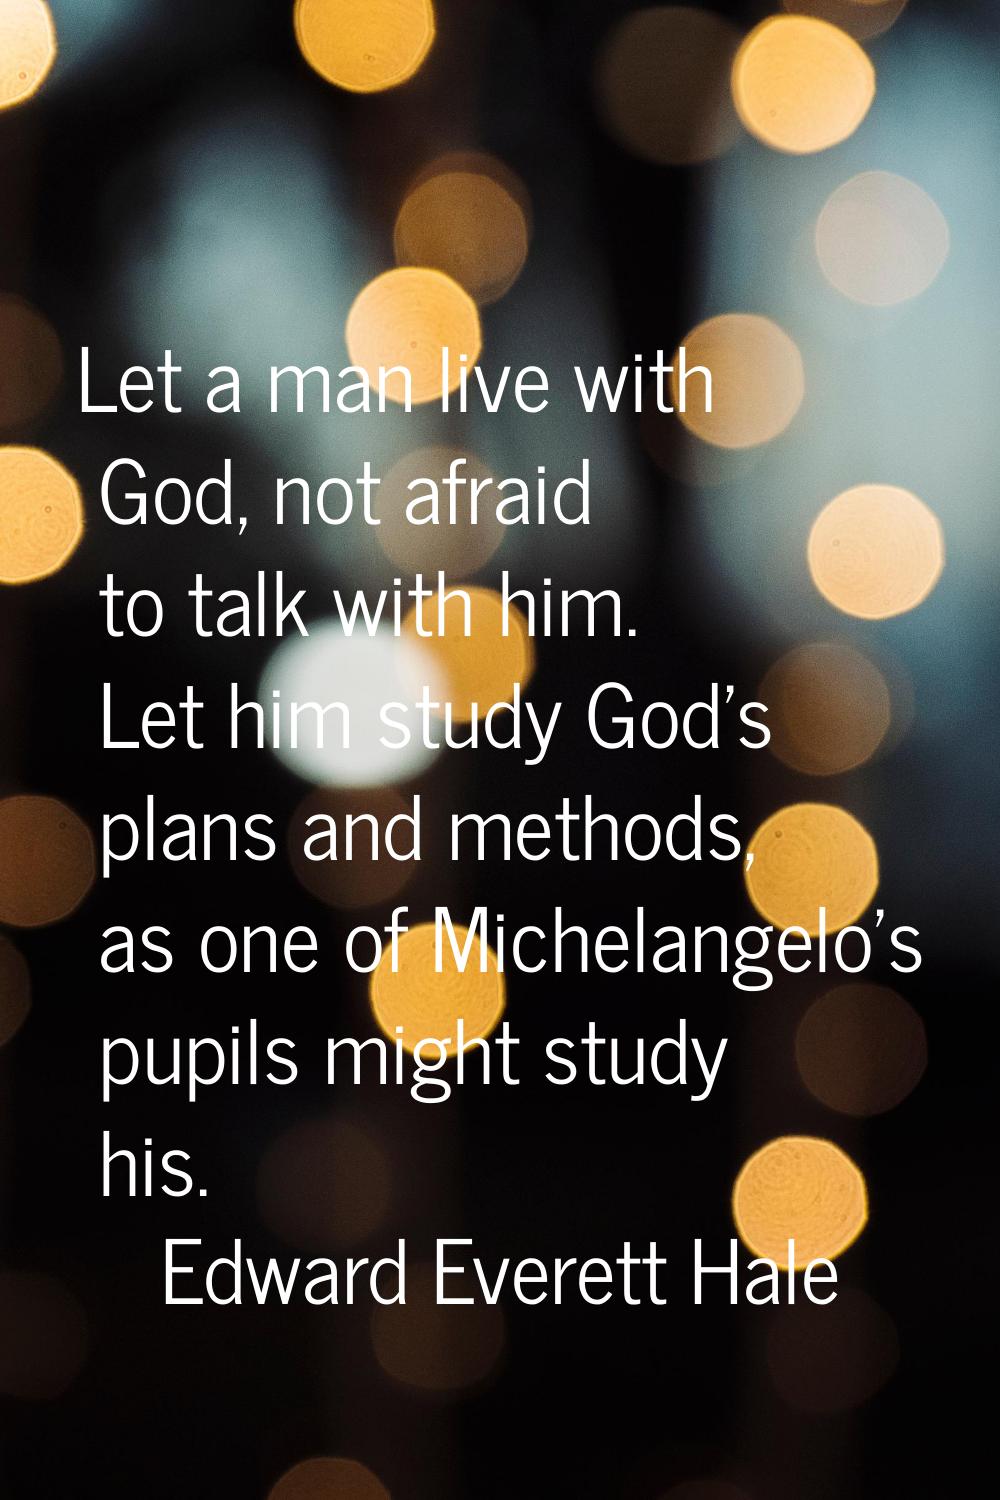 Let a man live with God, not afraid to talk with him. Let him study God's plans and methods, as one